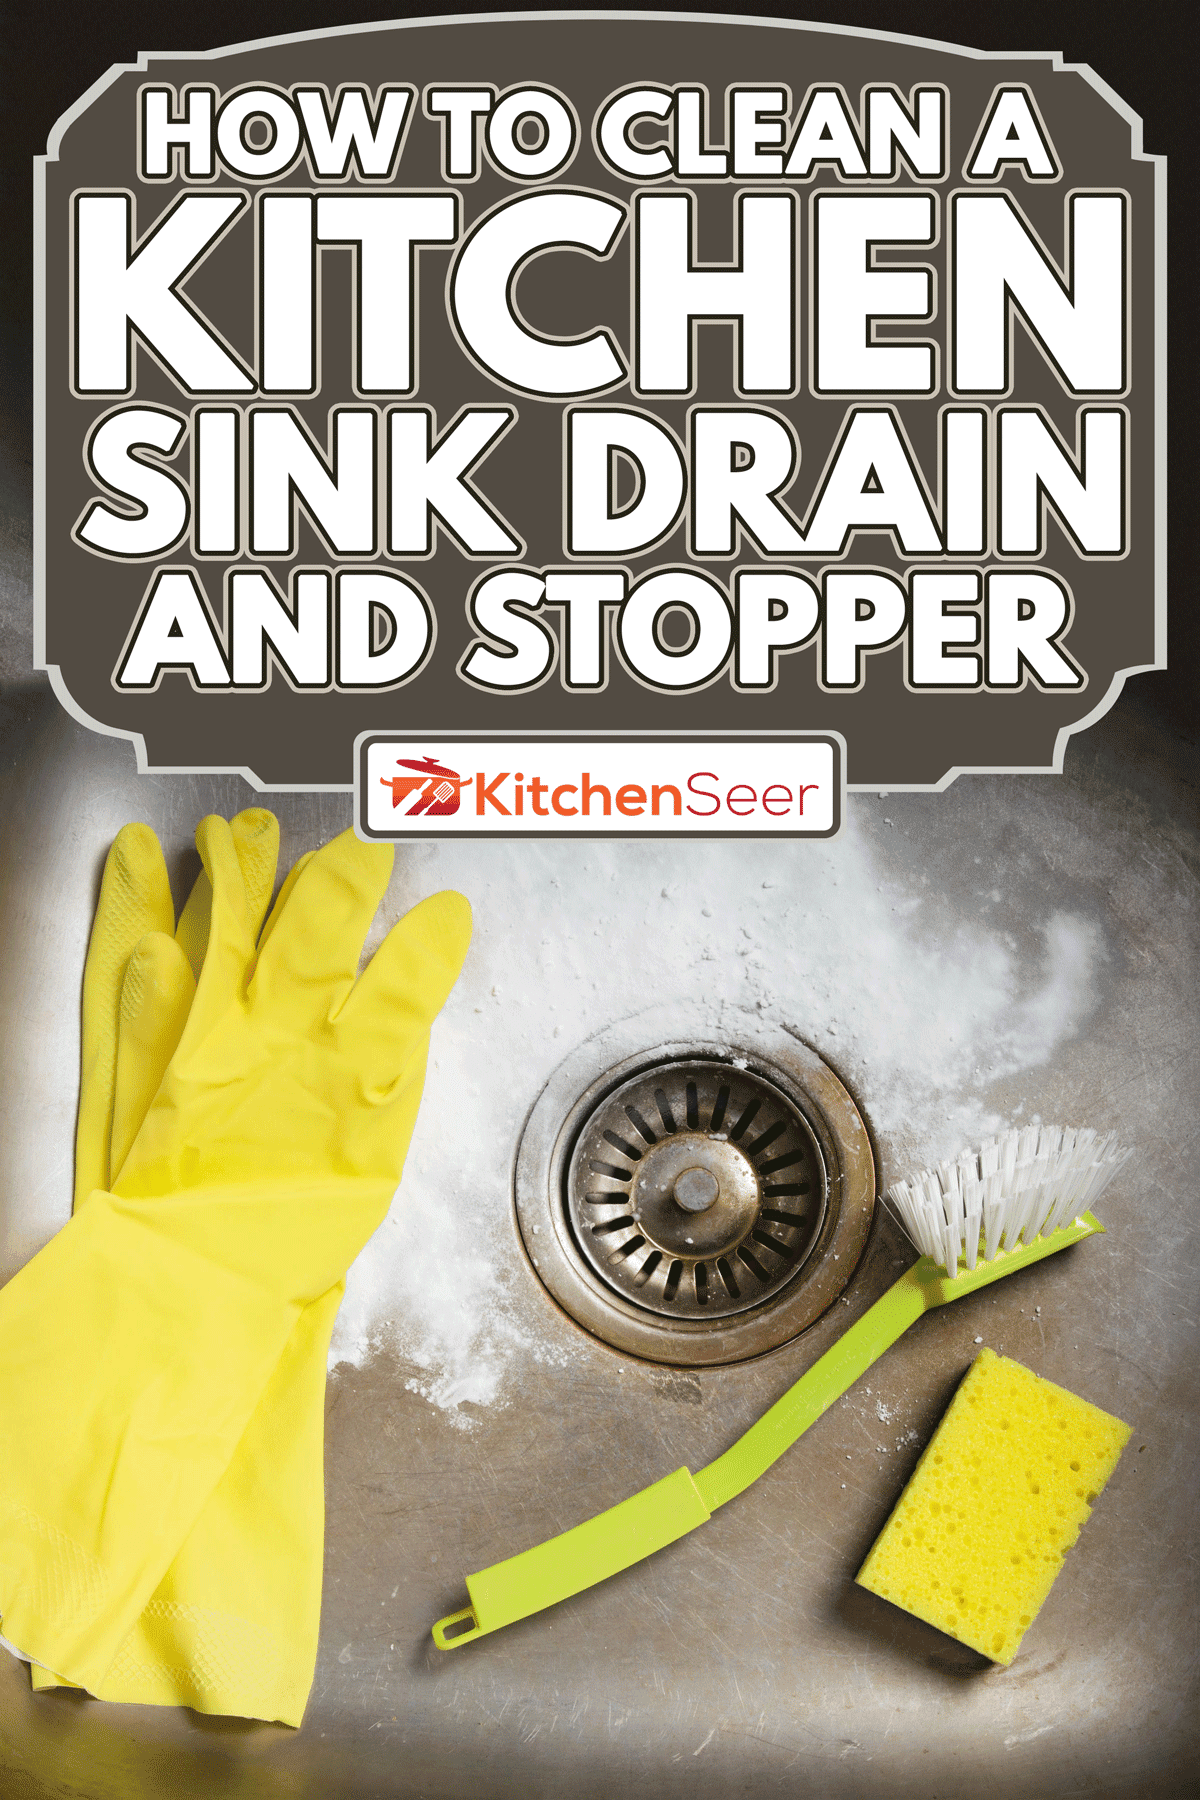 Cleaning products and rubber gloves in a dirty kitchen sink, How To Clean A Kitchen Sink Drain And Stopper